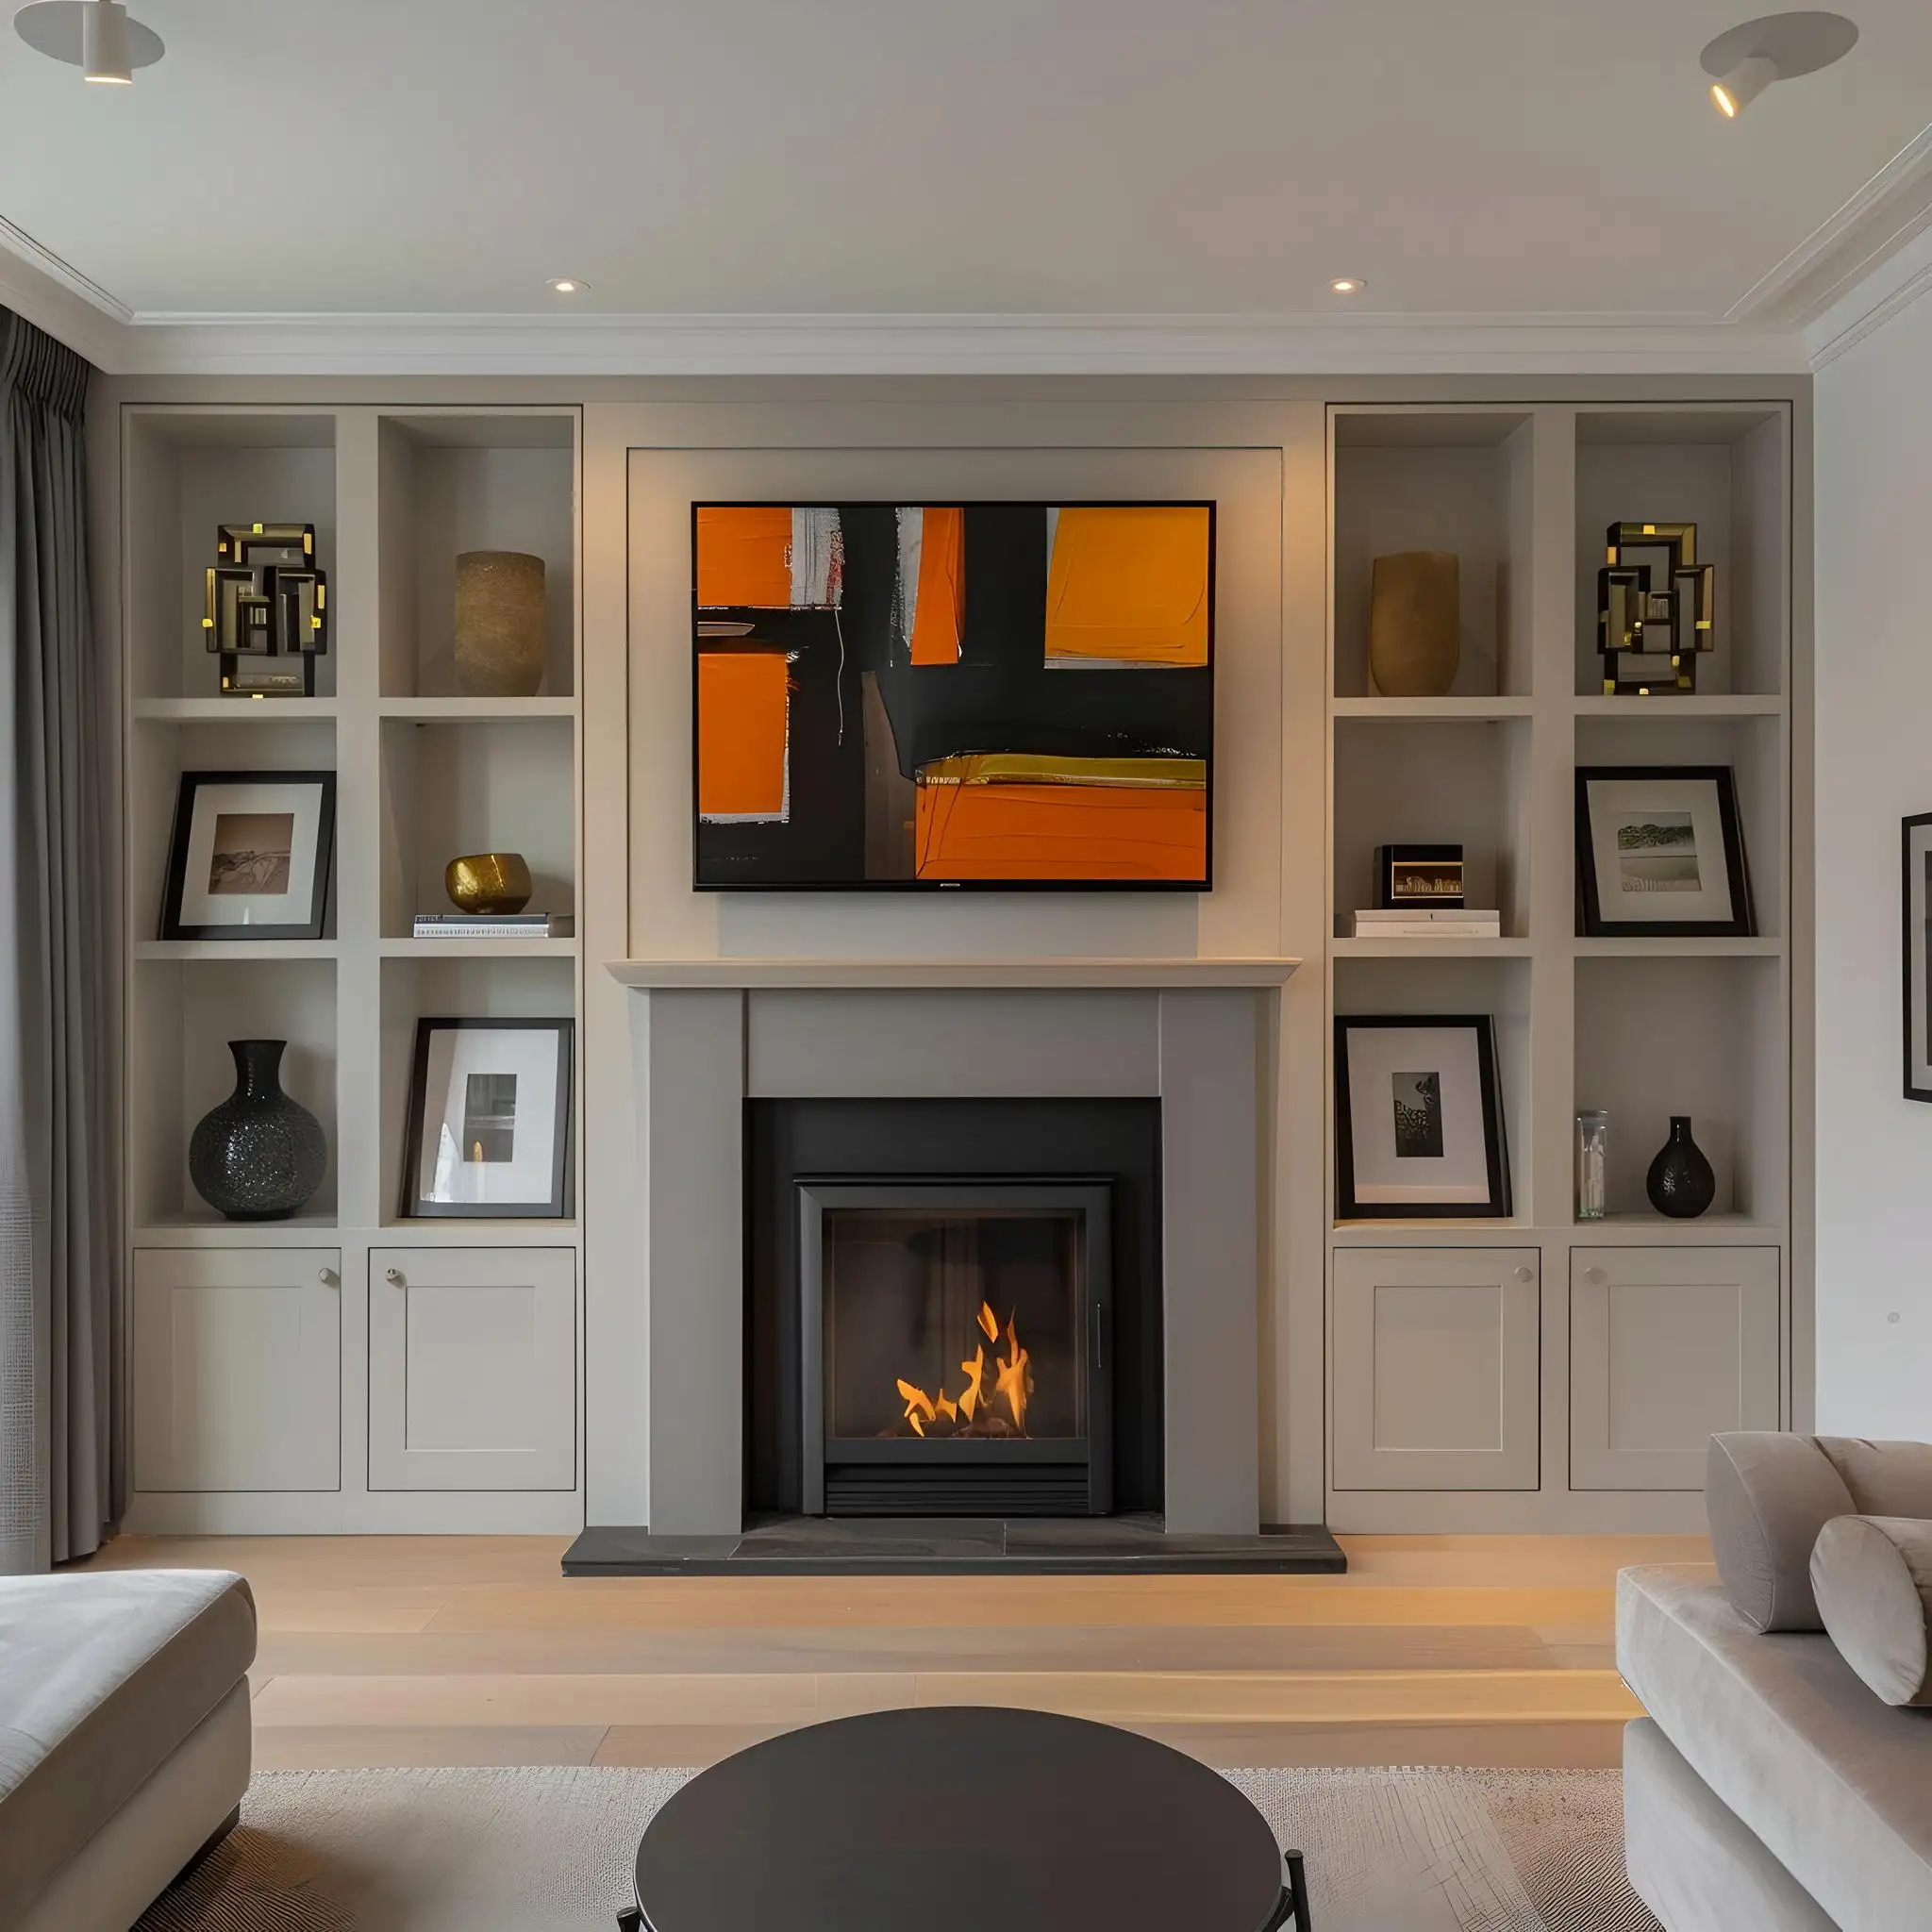 Custom-made built-in grey alcove units